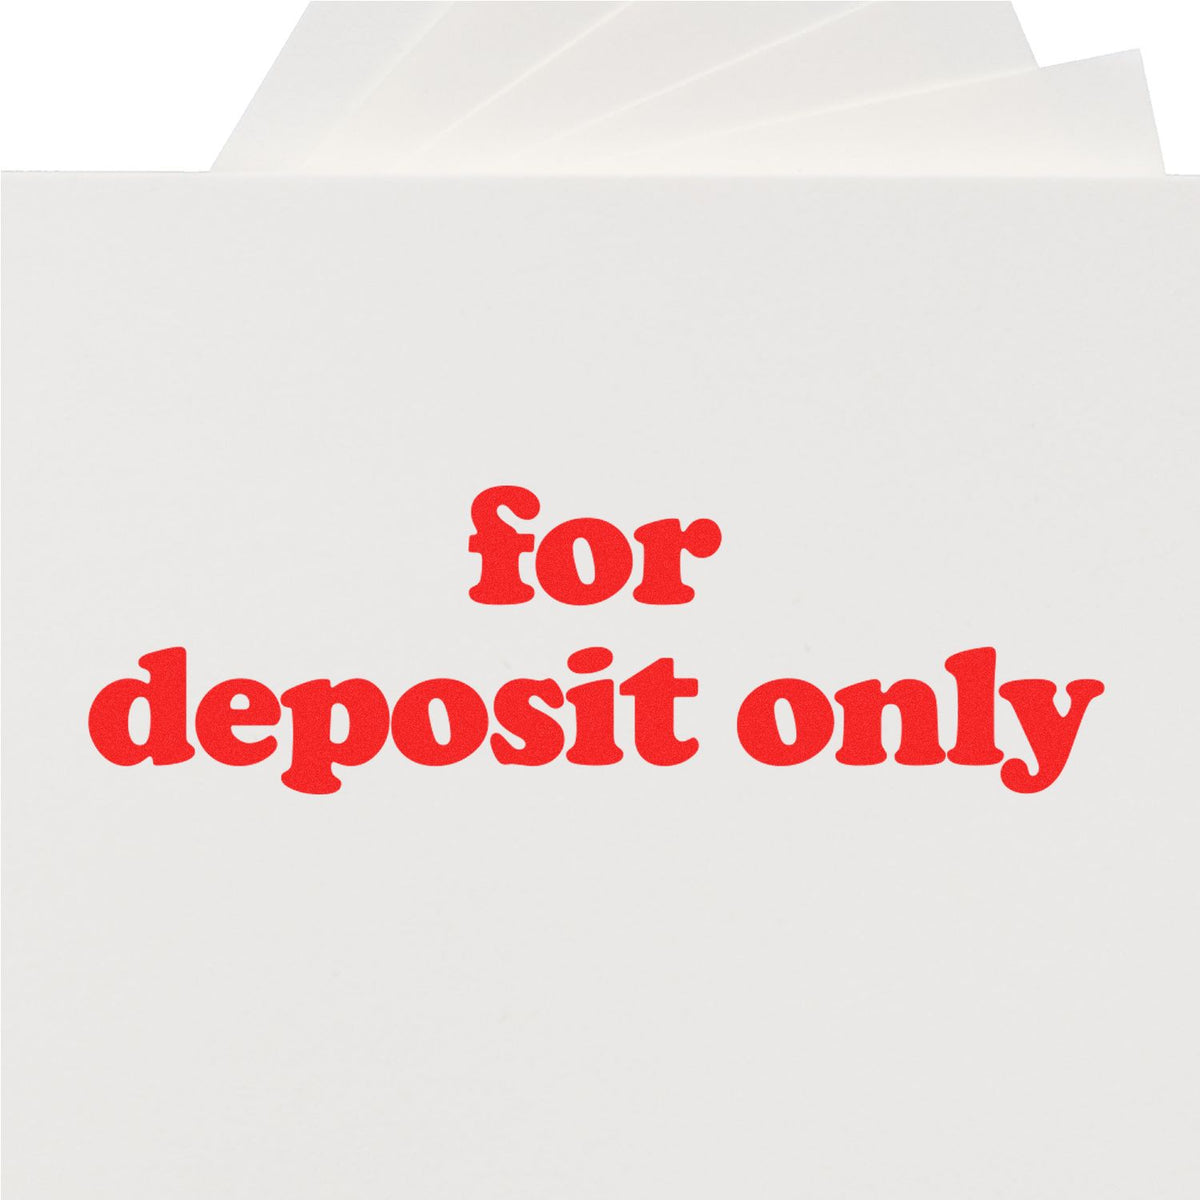 Lowercase For Deposit Only Rubber Stamp In Use Photo